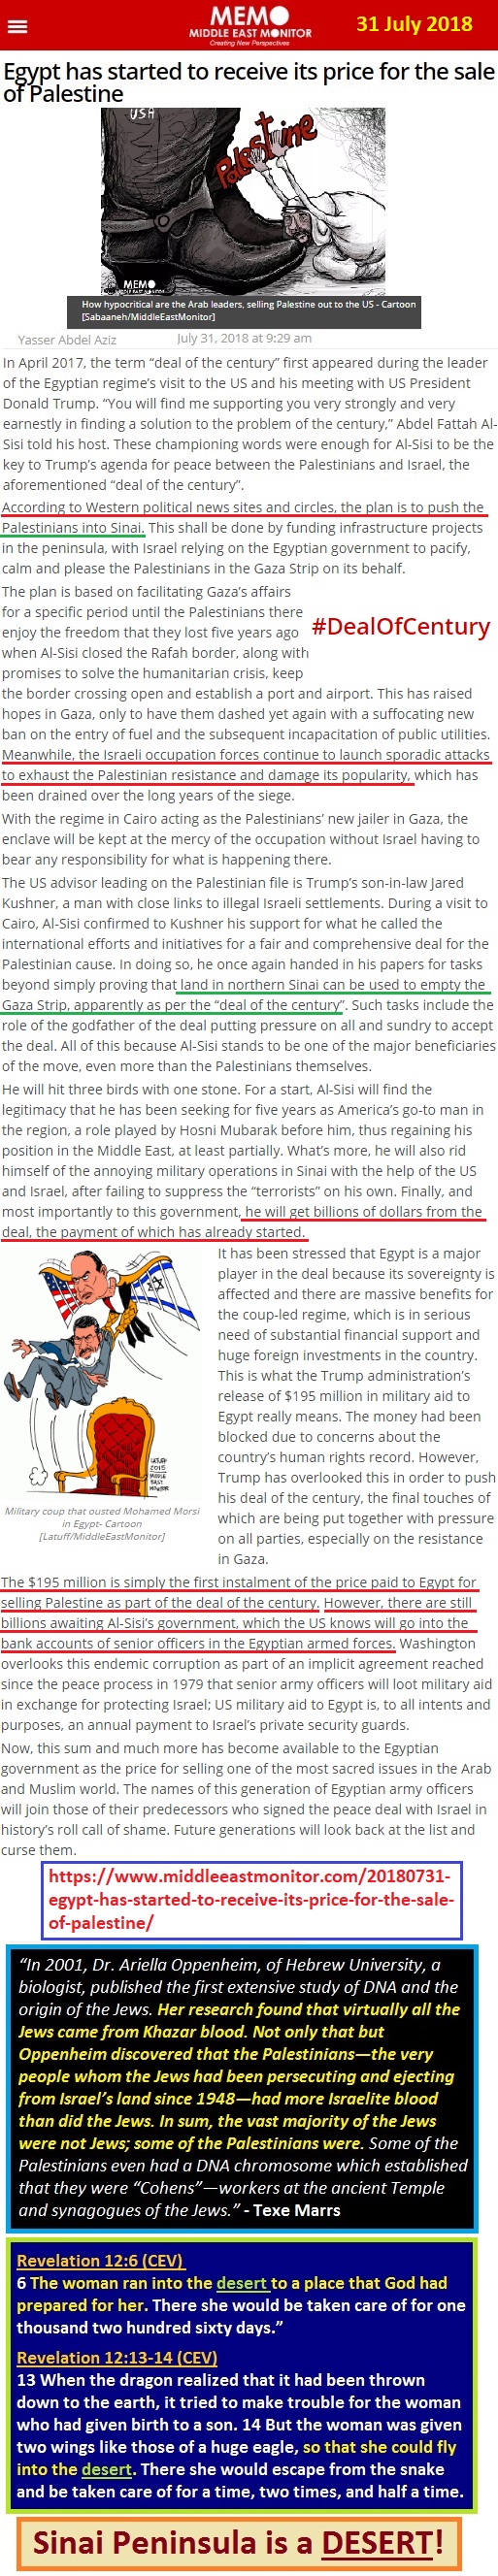 https://www.middleeastmonitor.com/20180731-egypt-has-started-to-receive-its-price-for-the-sale-of-palestine/